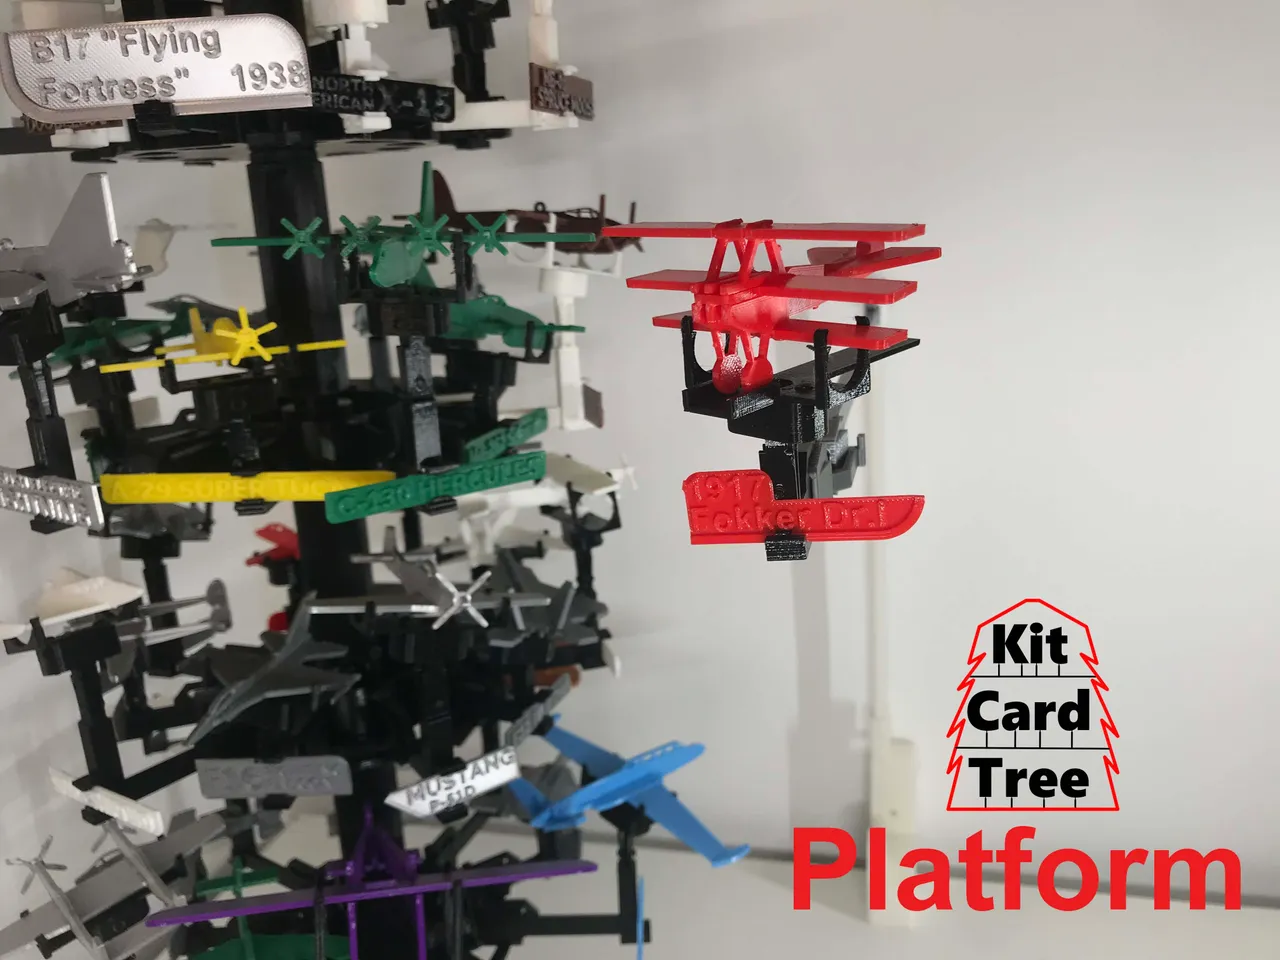 Kit Card Tree platform for the Fokker DRI by Toto_28 by 